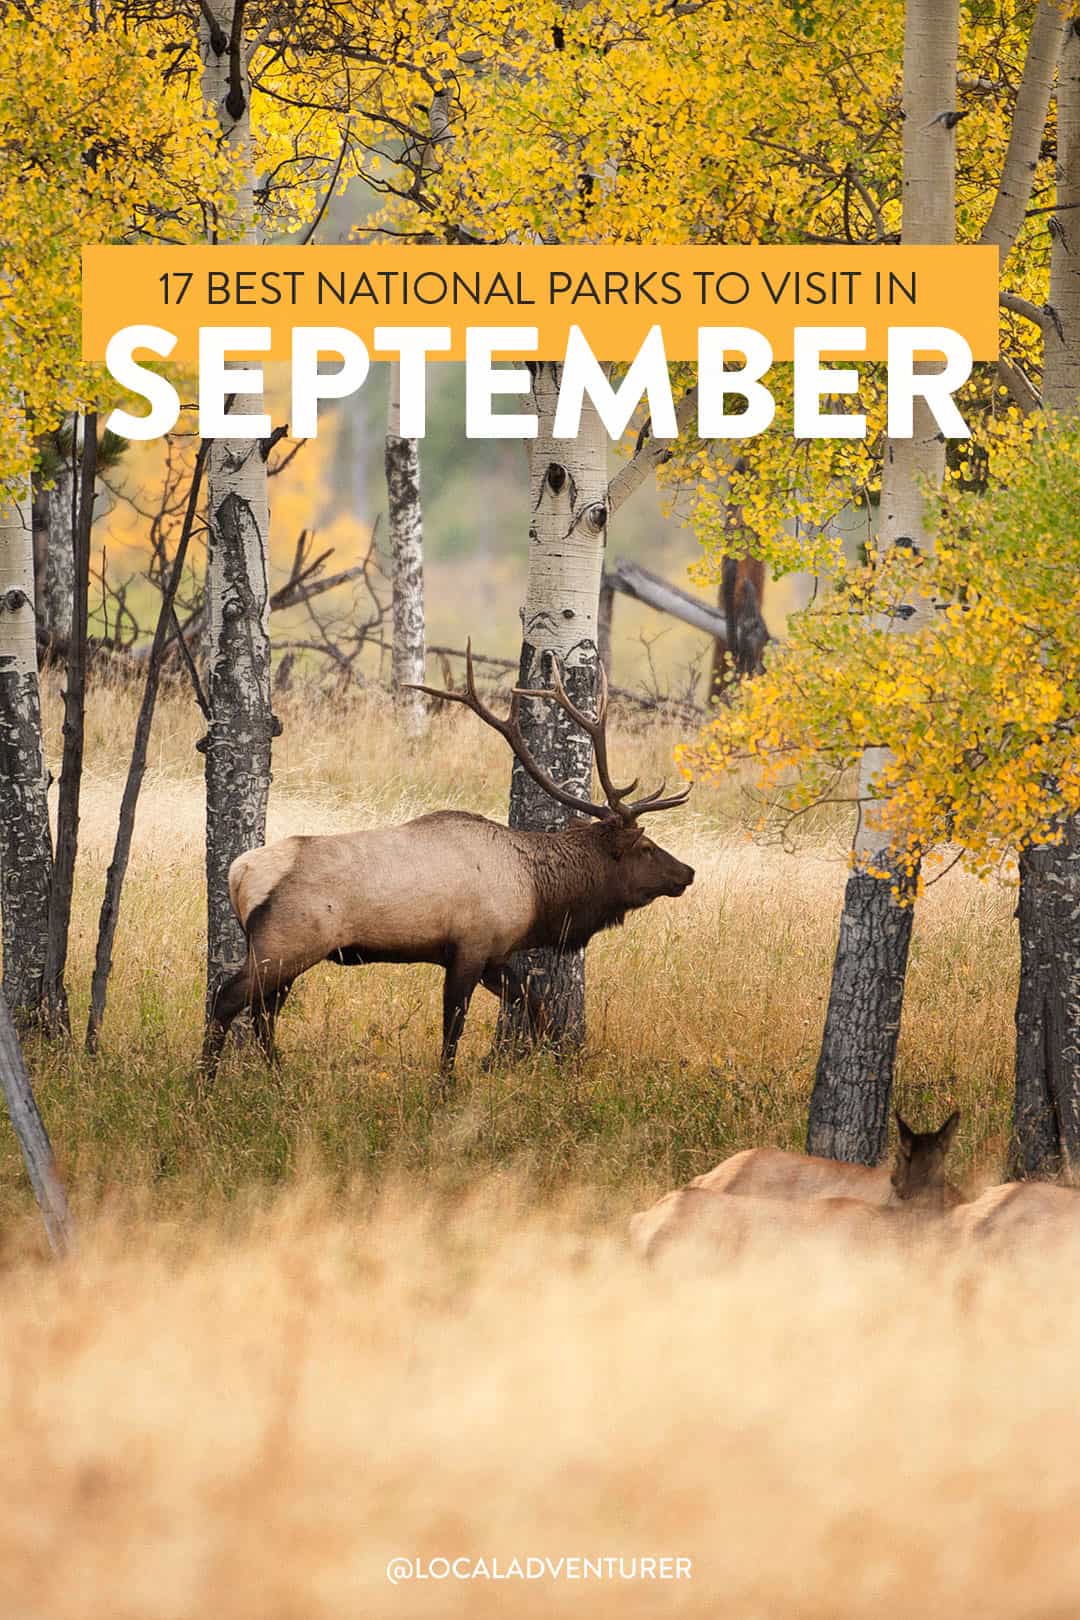 best national parks to visit in september title over Elk in autumn forest in Rocky Mountain National Park